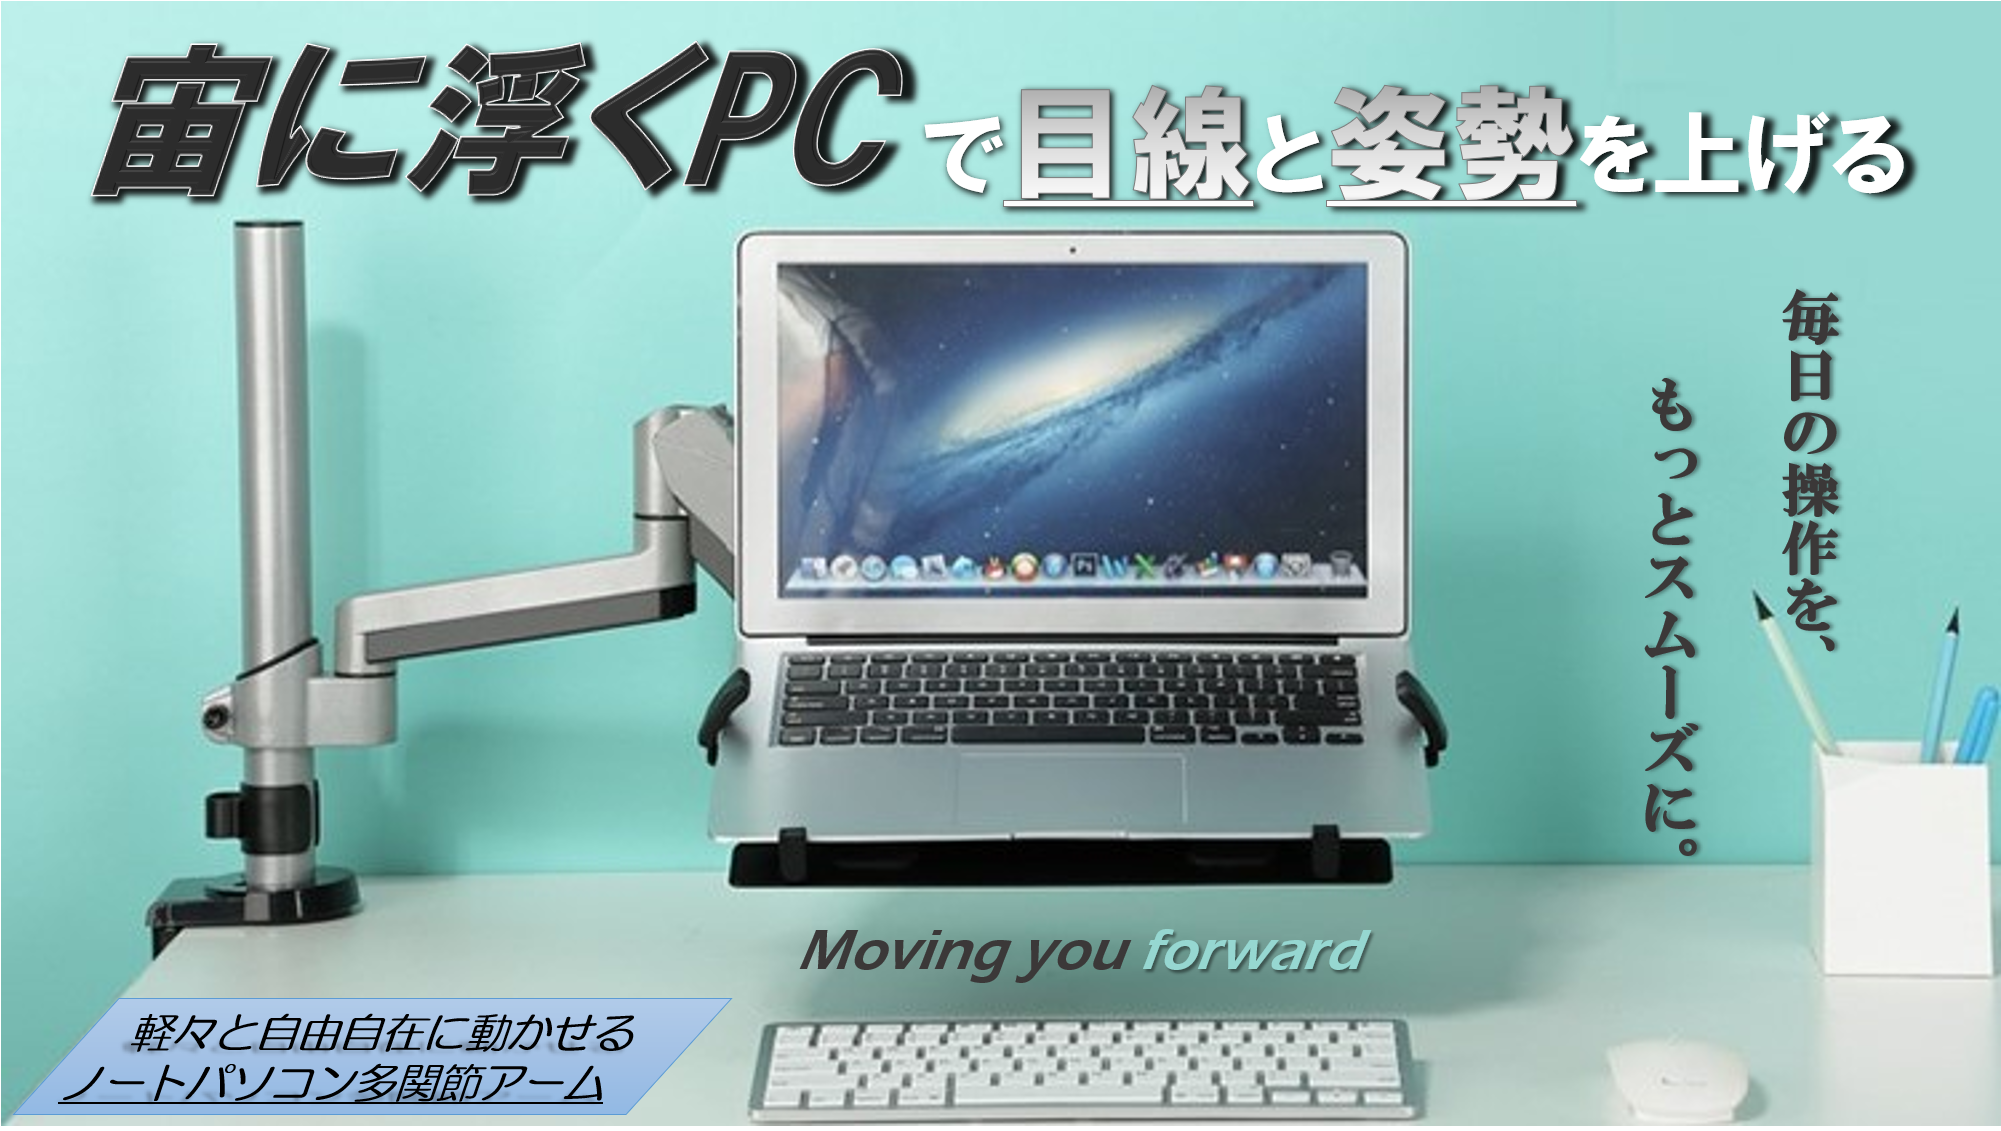 Increase comfort and productivity with this ergonomically designed articulating laptop arm!